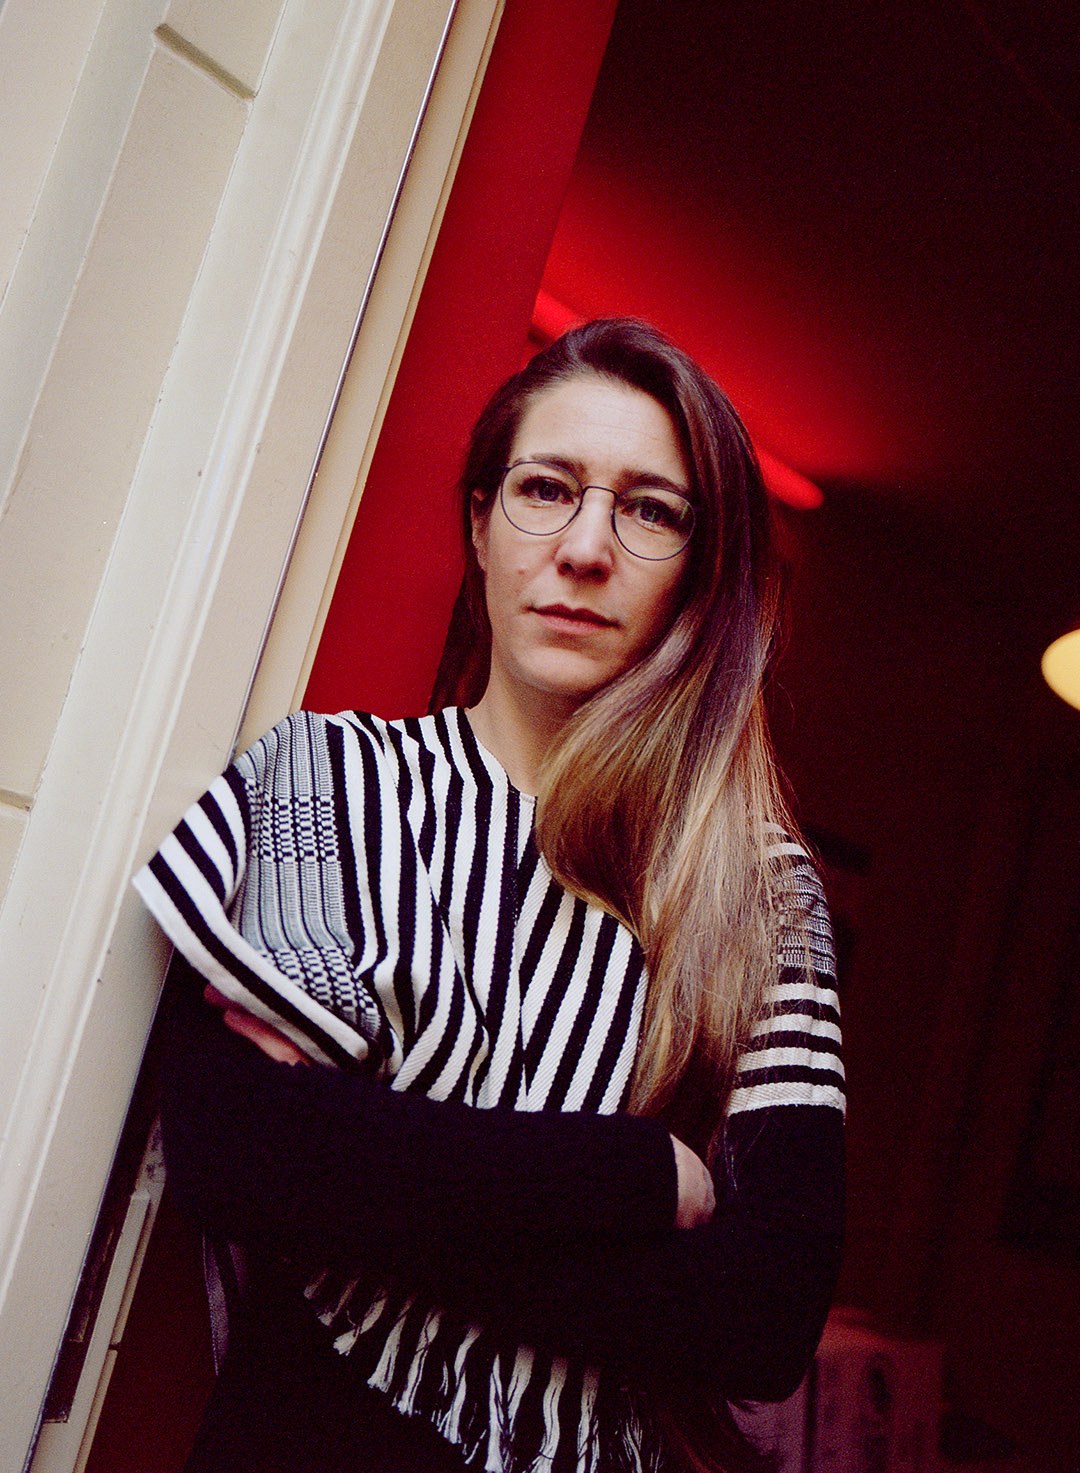 Lena Willikens © Mike Chalmers